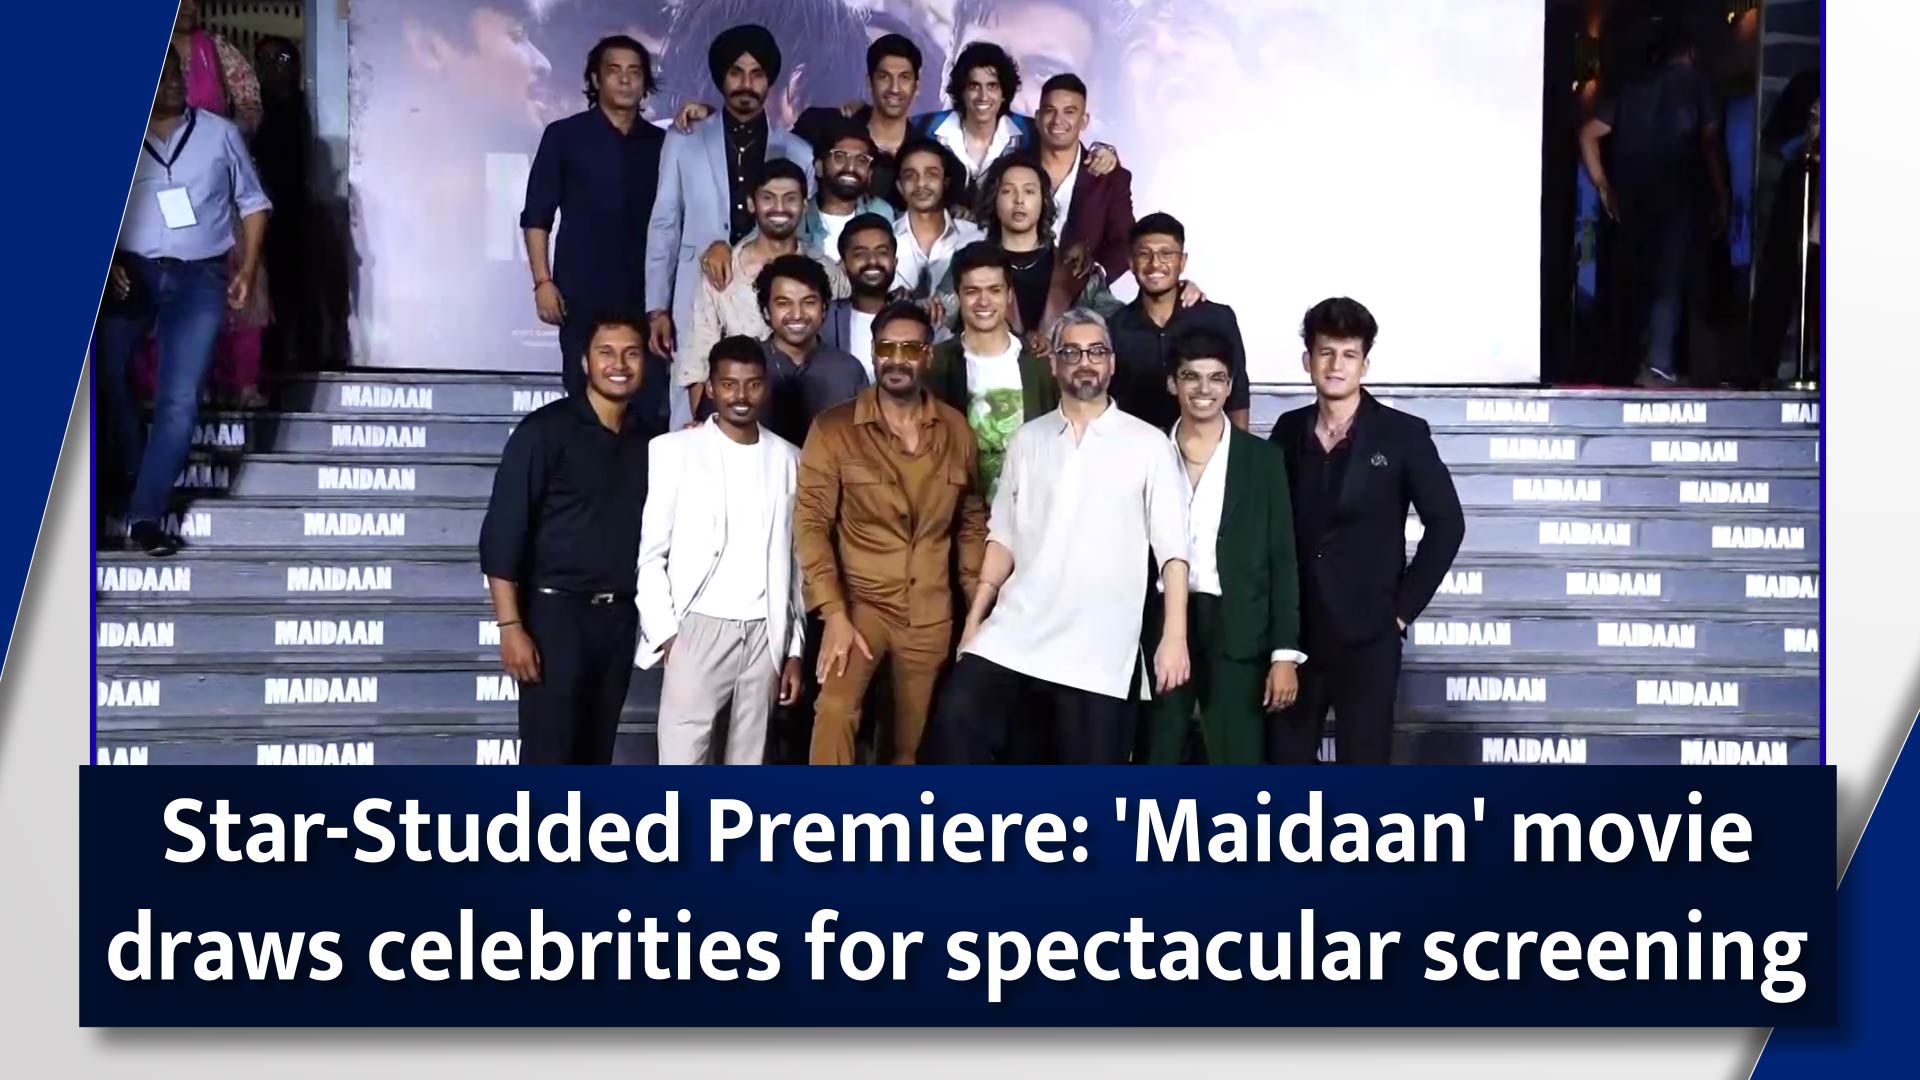 Star-Studded Premiere: 'Maidaan' movie draws celebrities for spectacular screening